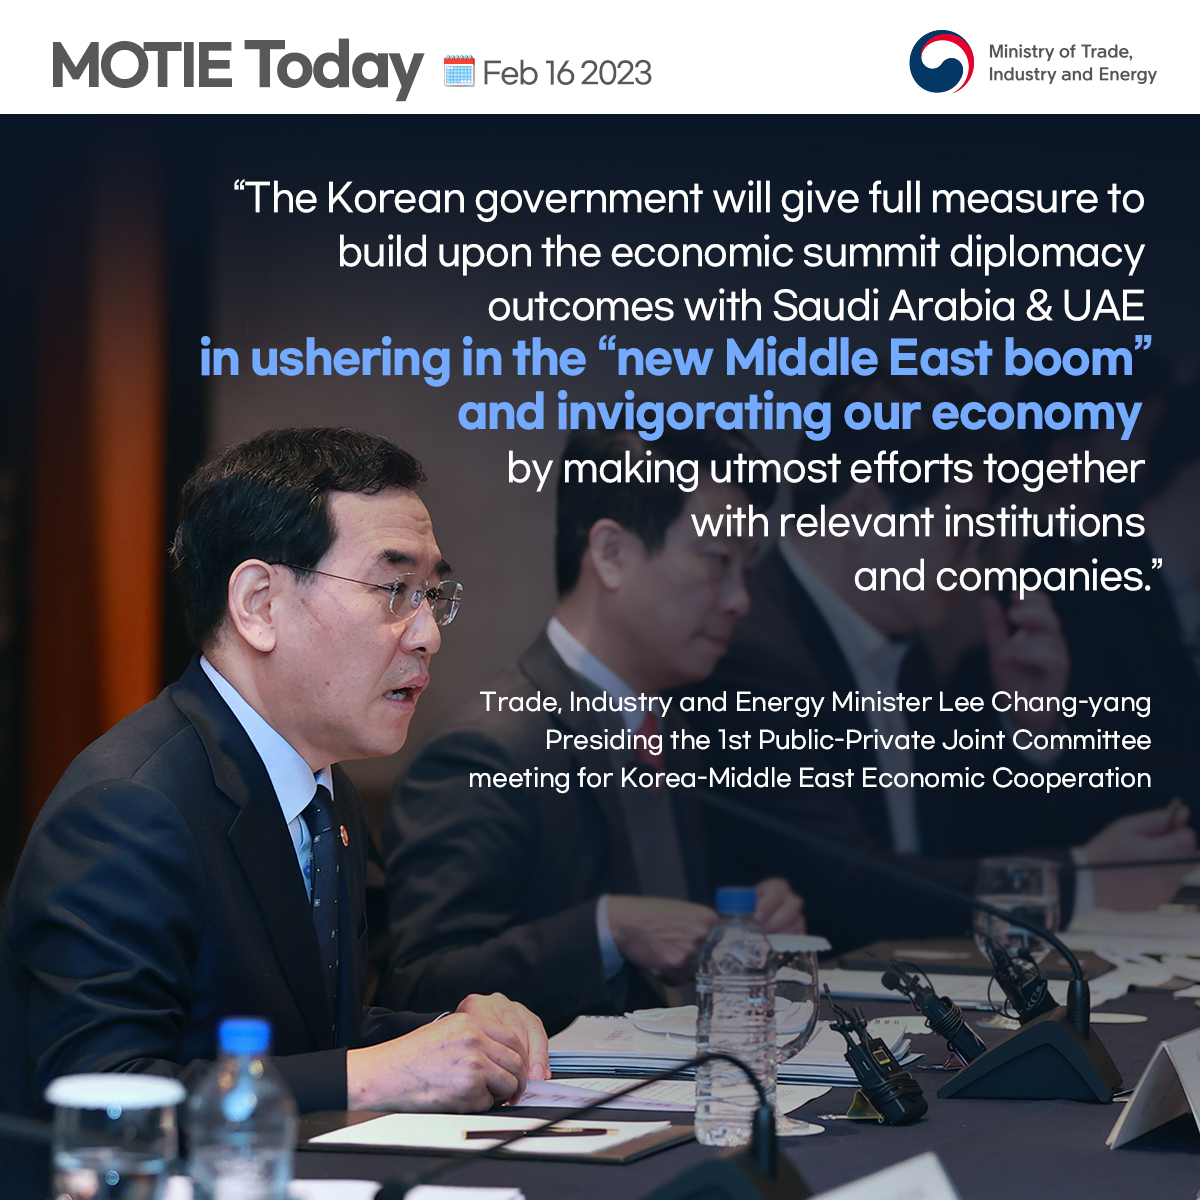 MOTIE launches public-private committee for Korea-Middle East economic cooperation Image 0